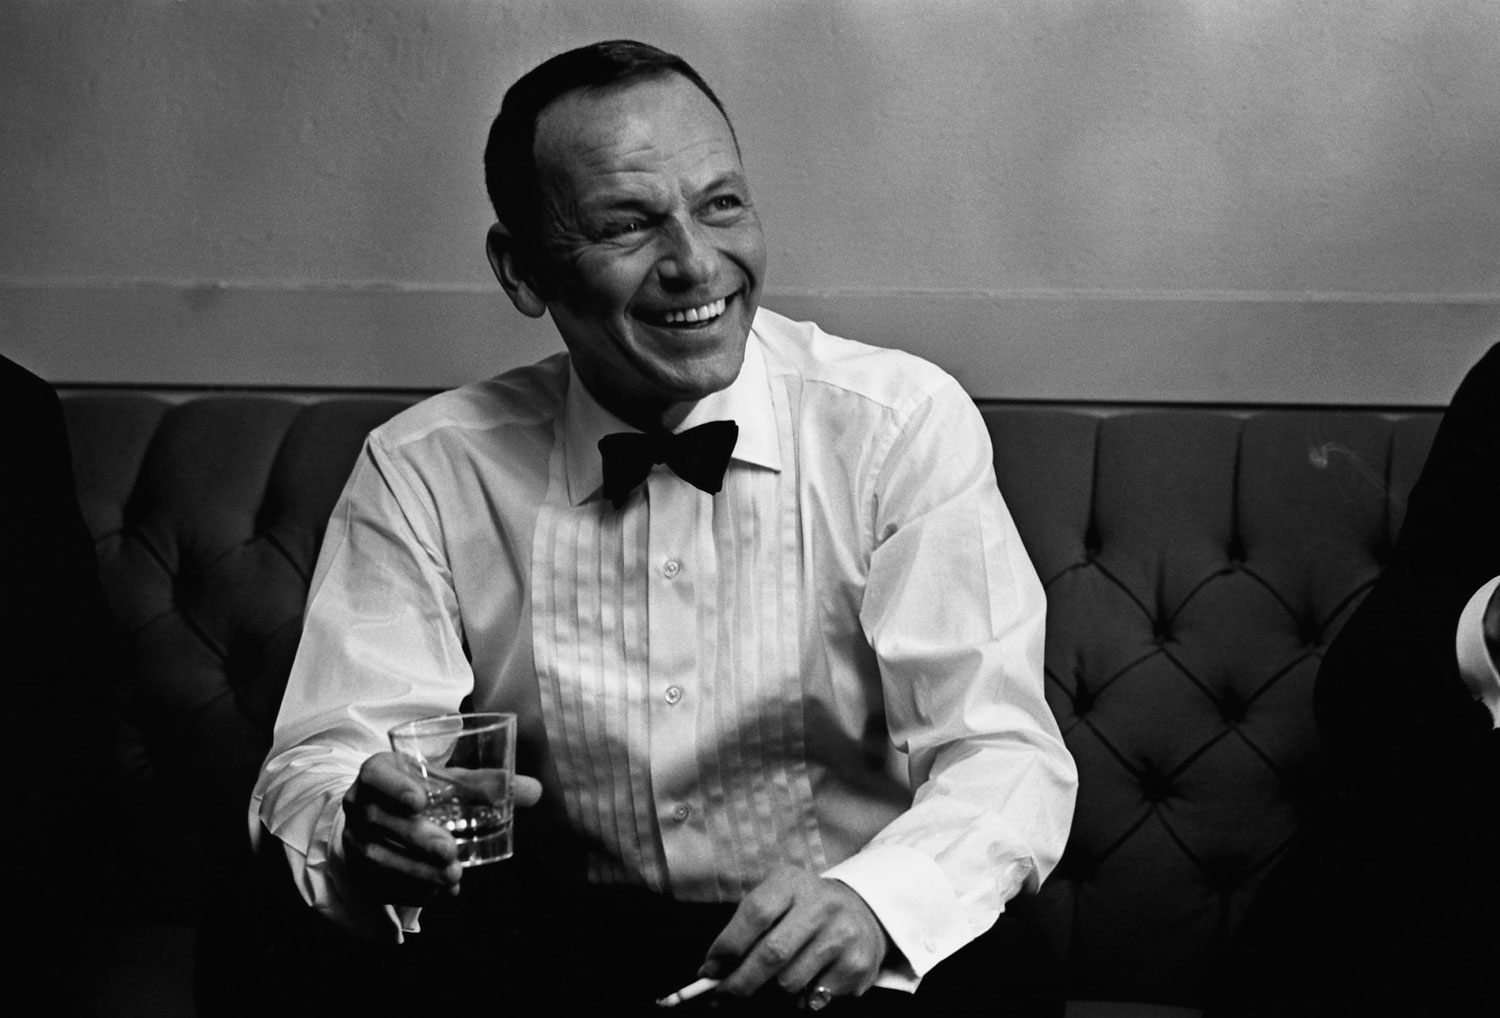 Portrait of Frank Sinatra in cigarette and high ball glass at the Sands Hotel and Casino in 1964. He is wearing a bow tie and tuxedo shirt and sitting on a sofa.